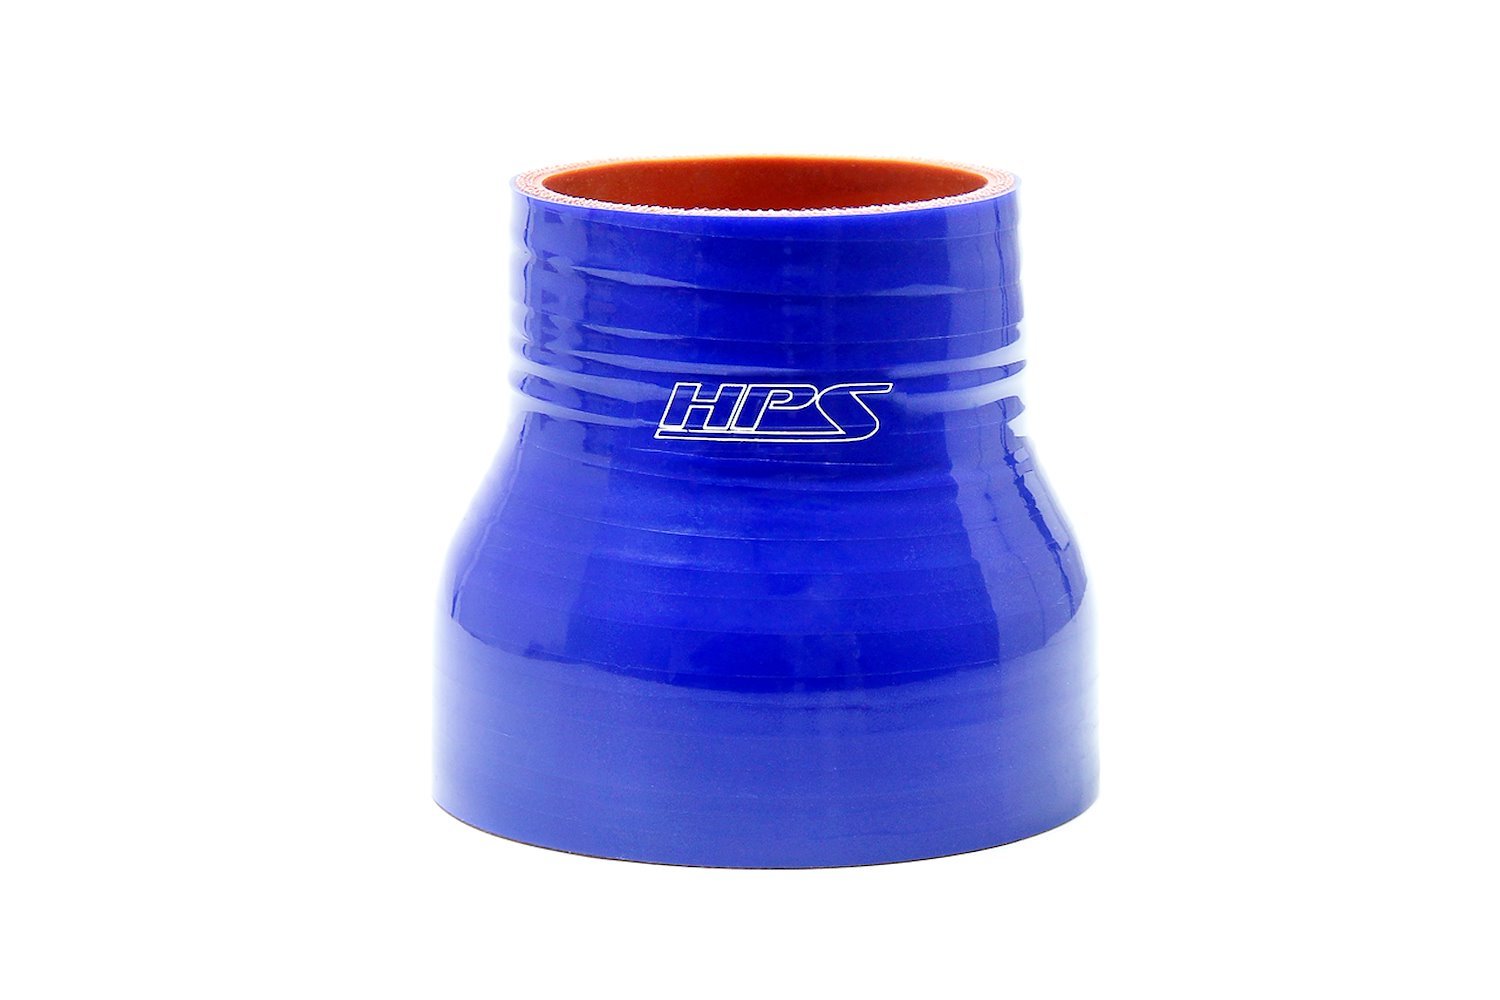 HTSR-275-312-BLUE Silicone Reducer Hose, High-Temp 4-Ply Reinforced, 2-3/4 in. - 3-1/8 in. ID, 3 in. Long, Blue